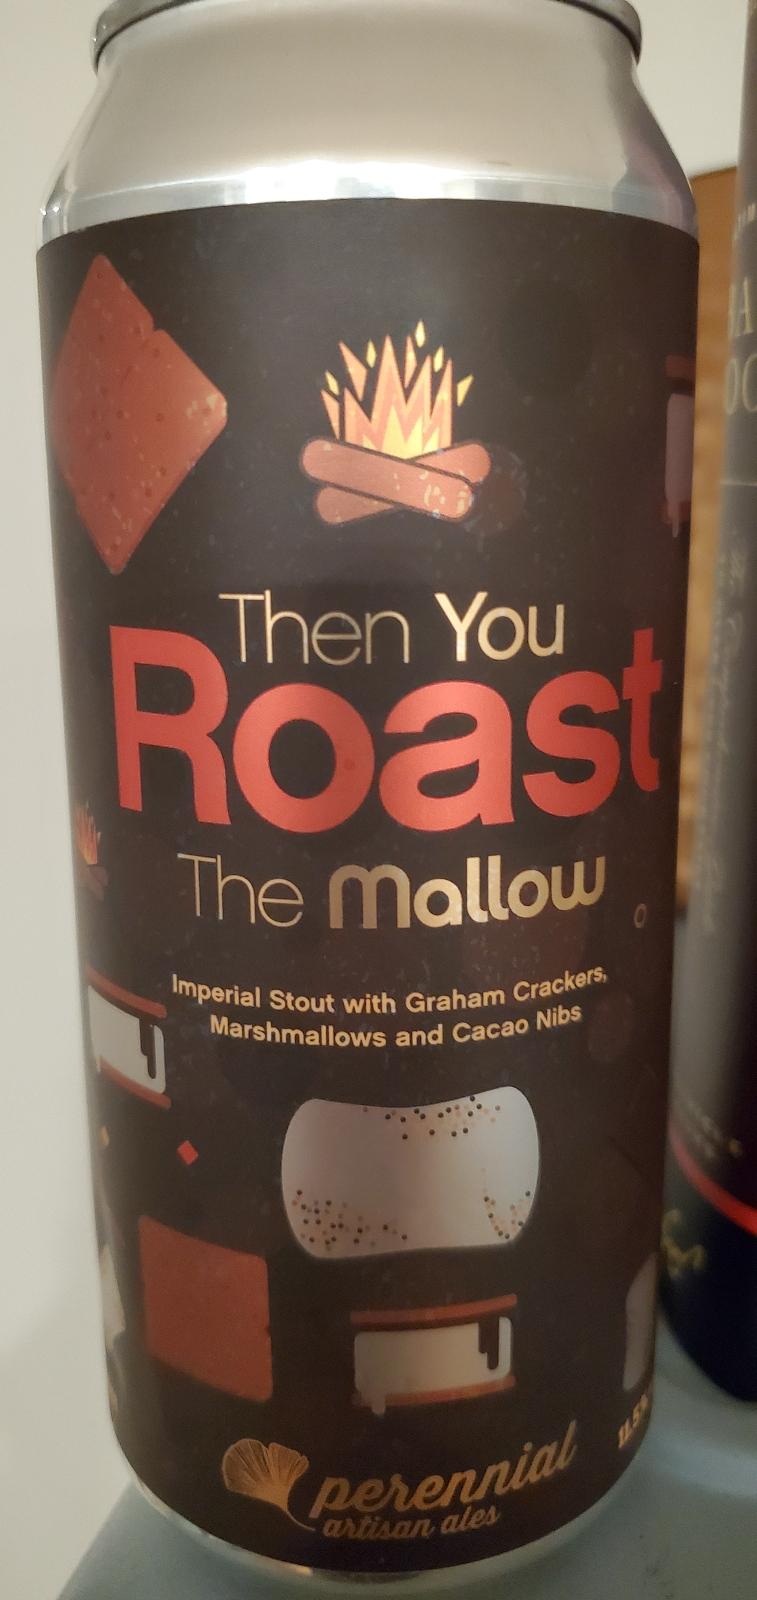 Then You Roast The Mallow